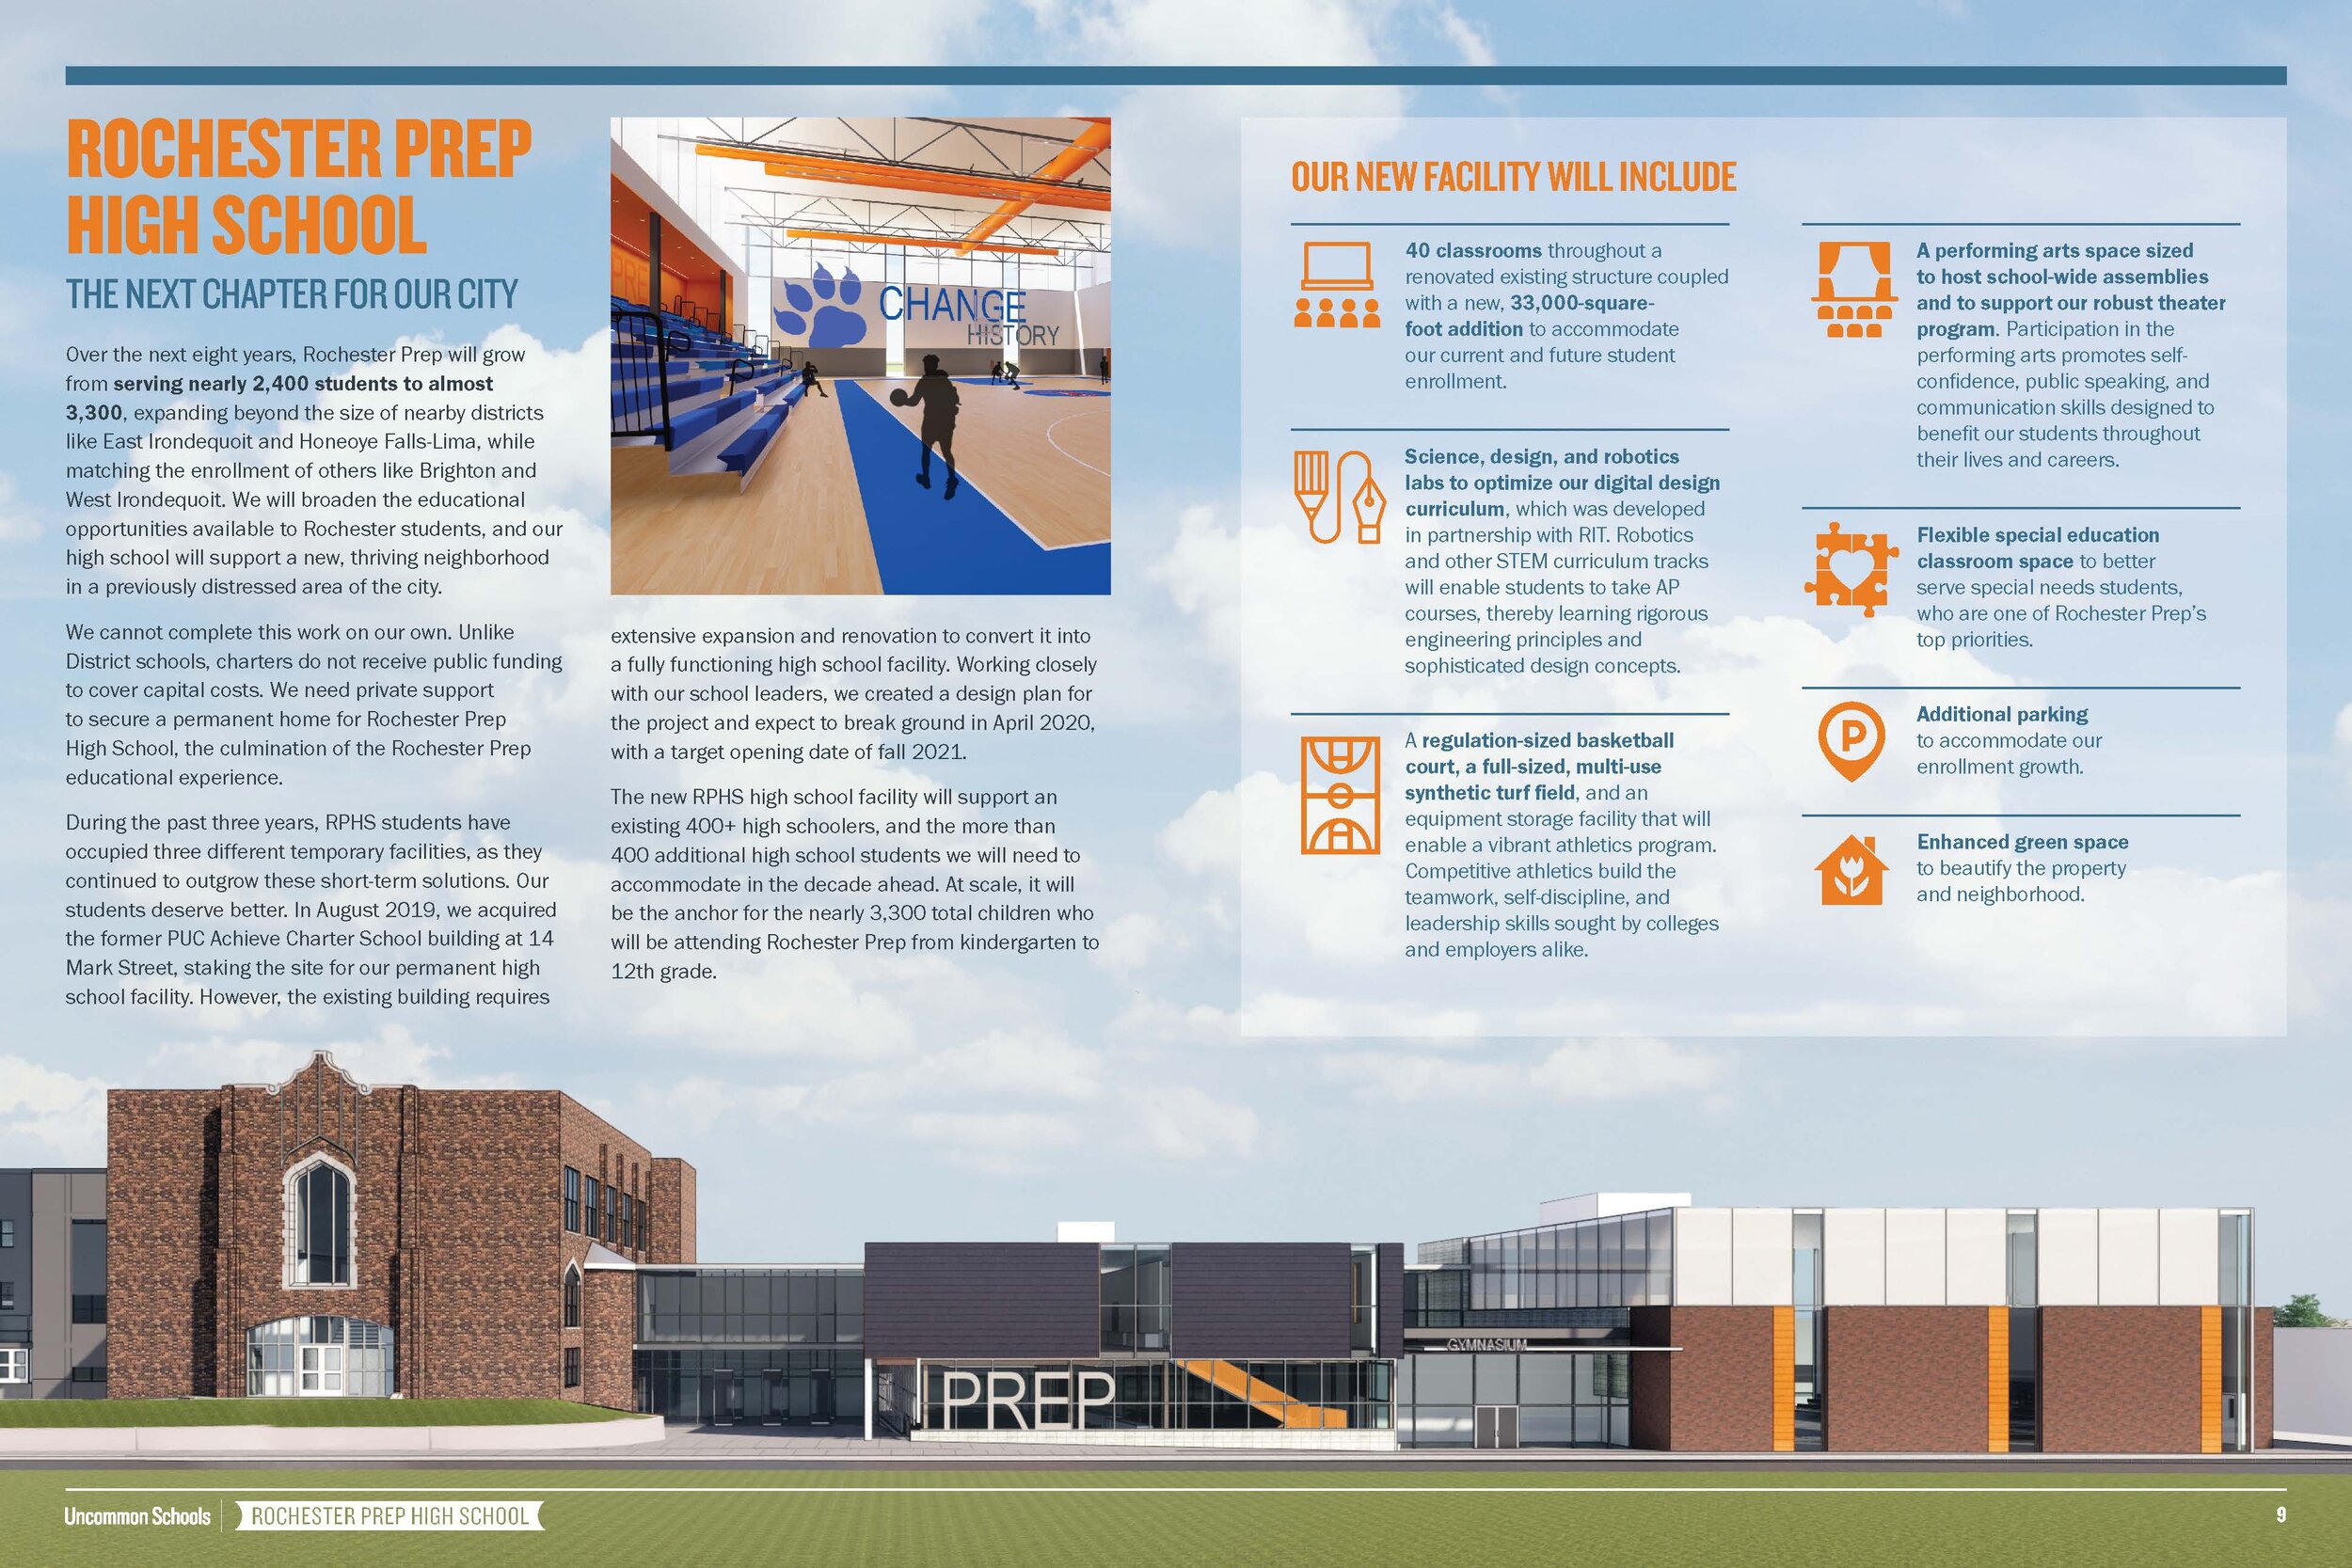 20191220_USI_Student_RT_Rochester_Brochure_v11_ReferenceOnly_Page_6.jpg